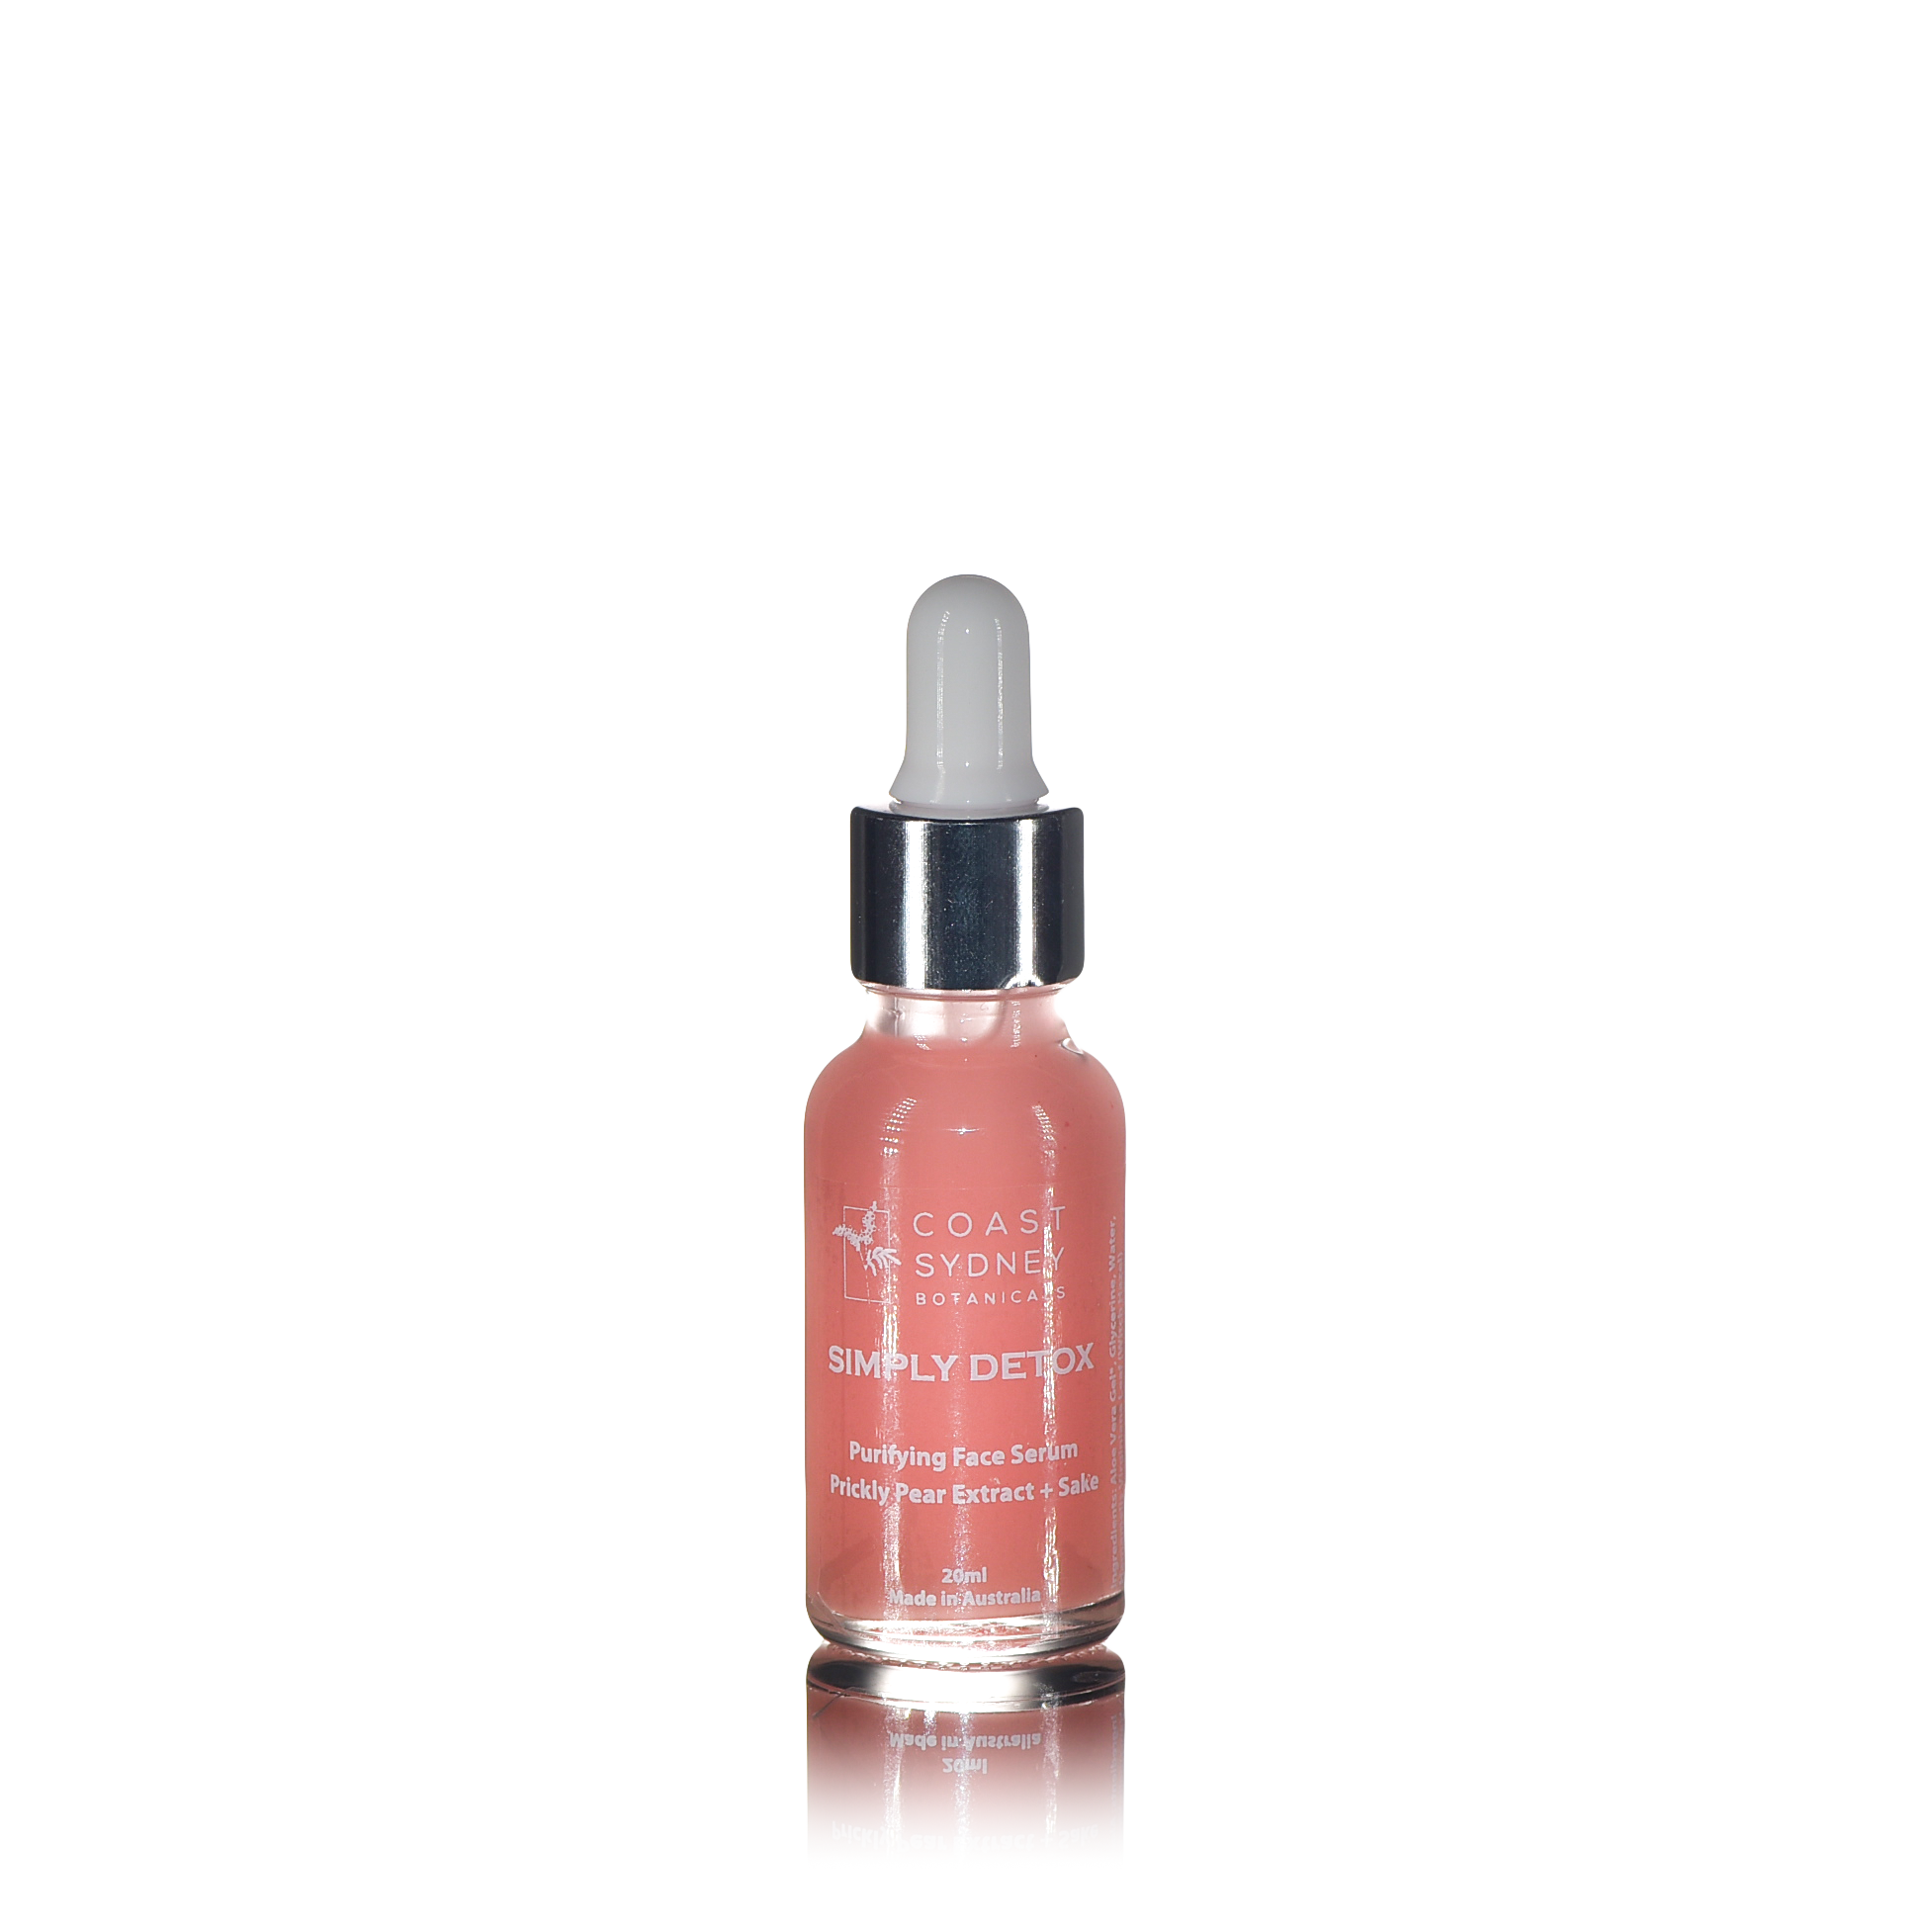 A pink face serum in a dropper bottle named 'Simply detox'.